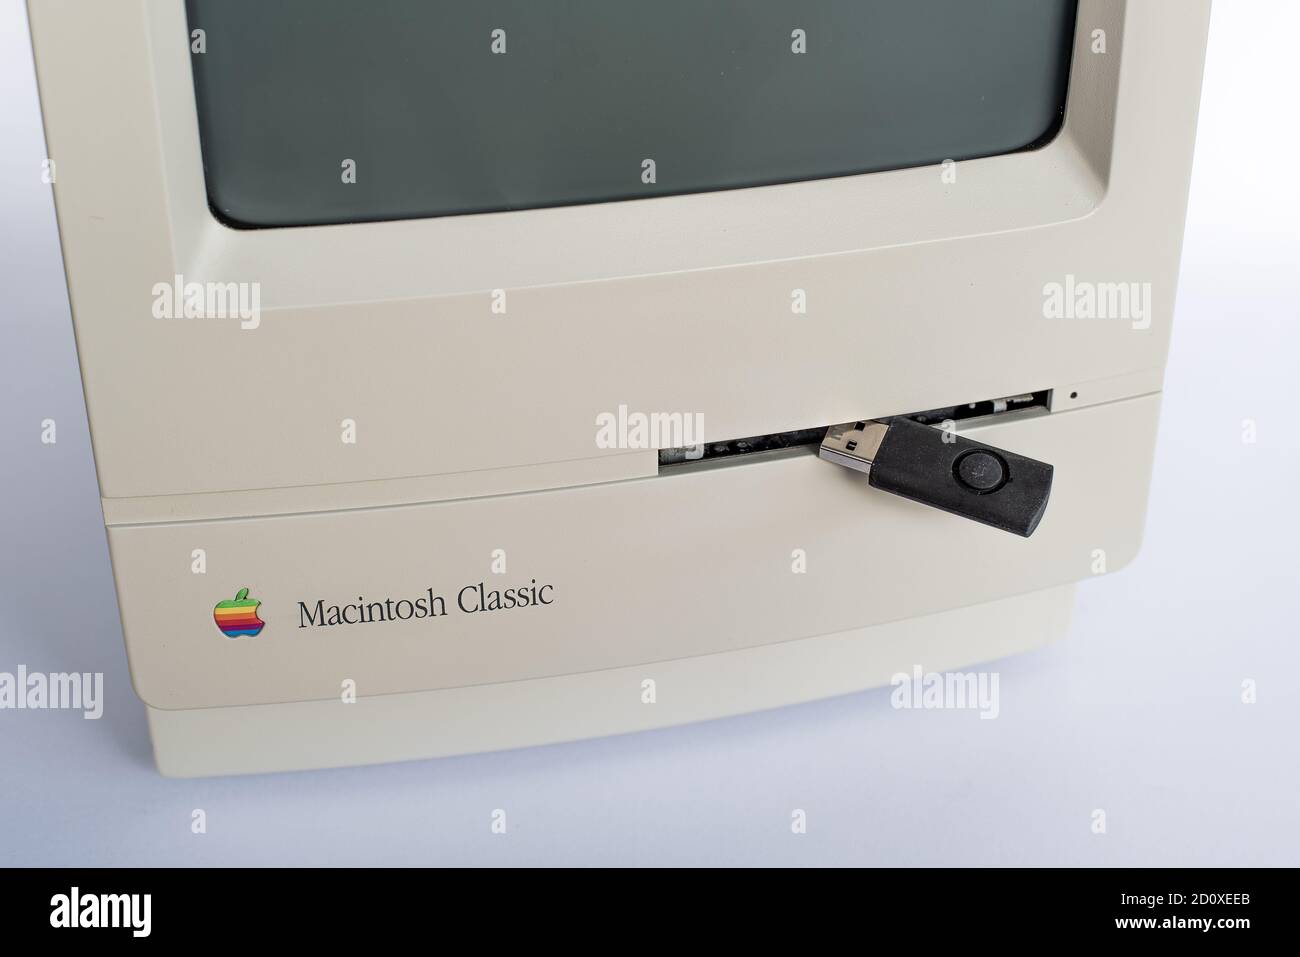 USB stick does not fit into an floppy disc drive on a Macintosh Classic, Denmark, september 28, 2020 Stock Photo